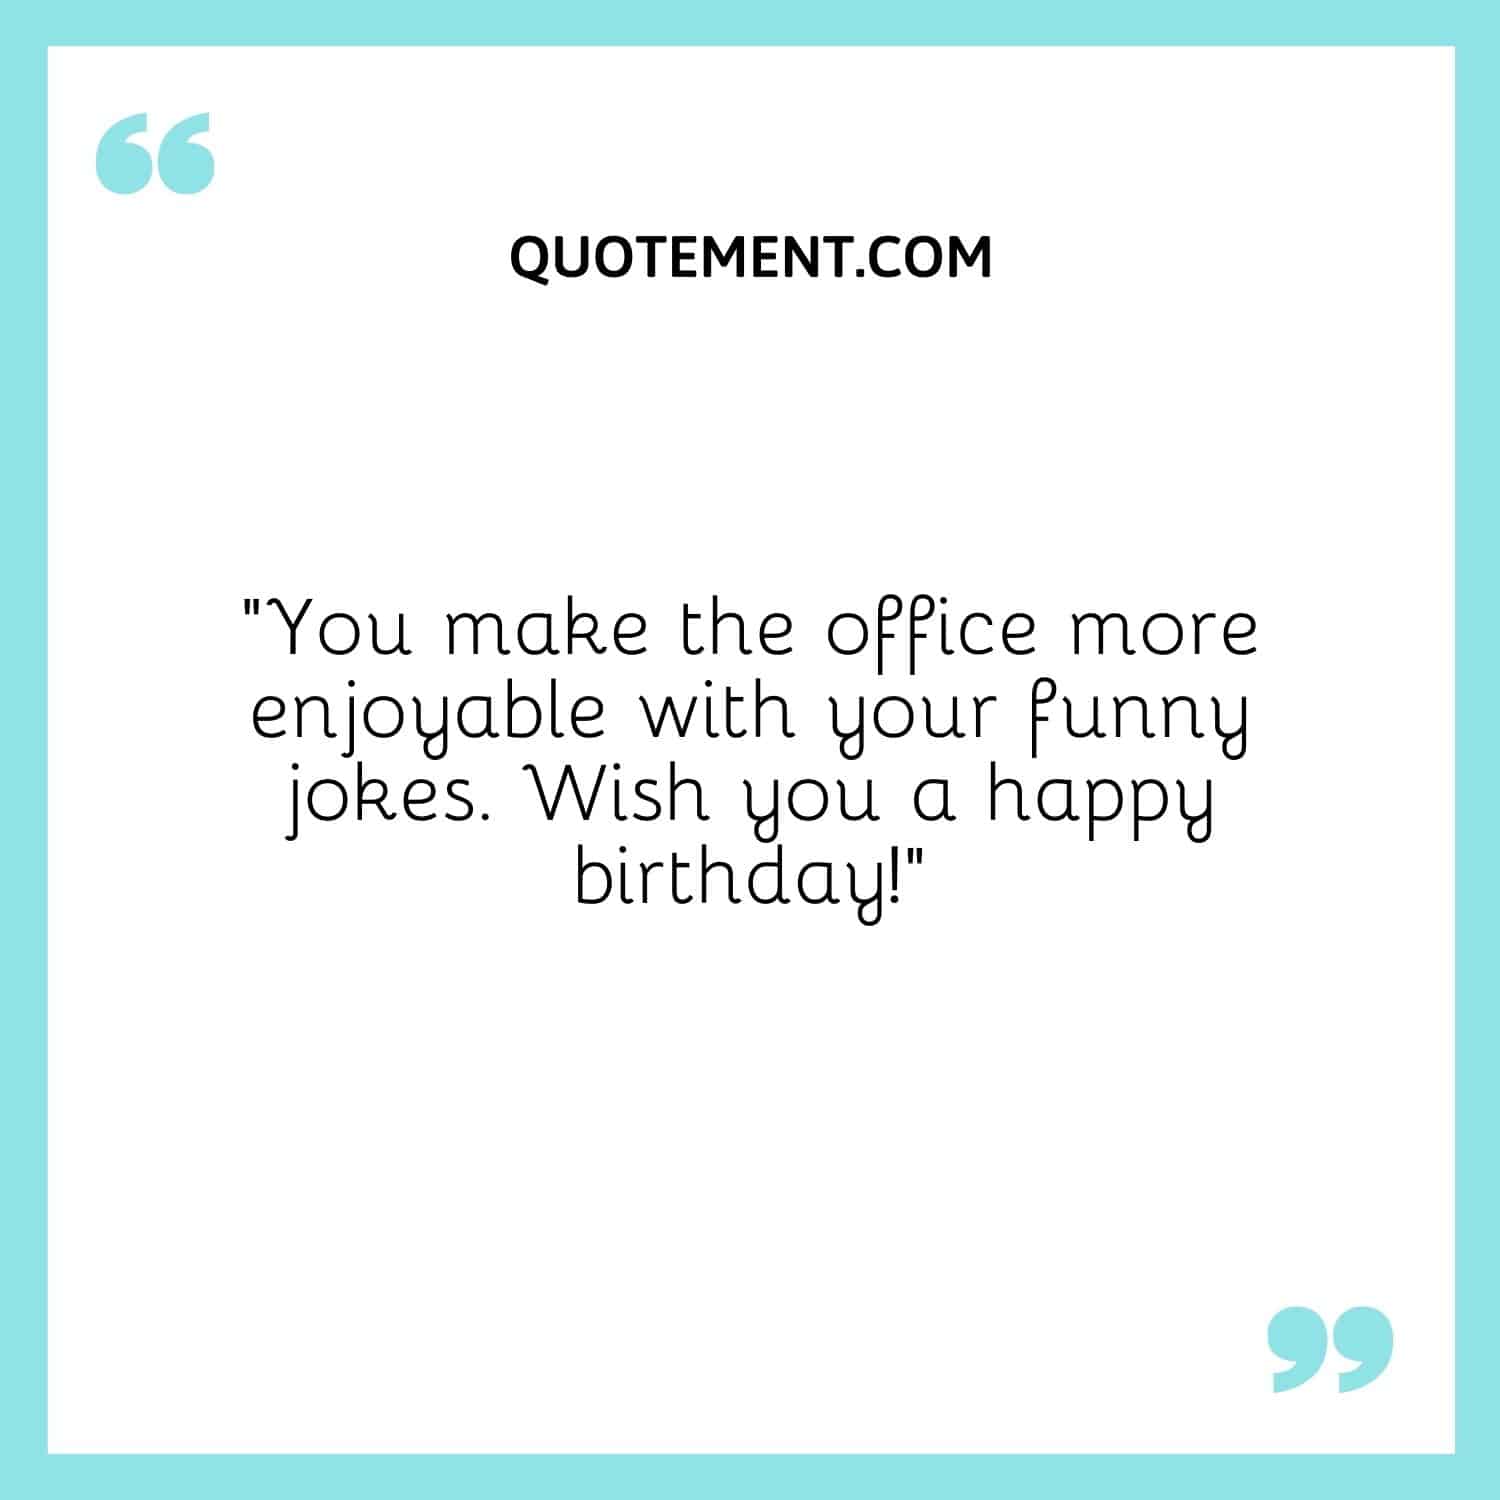 You make the office more enjoyable with your funny jokes